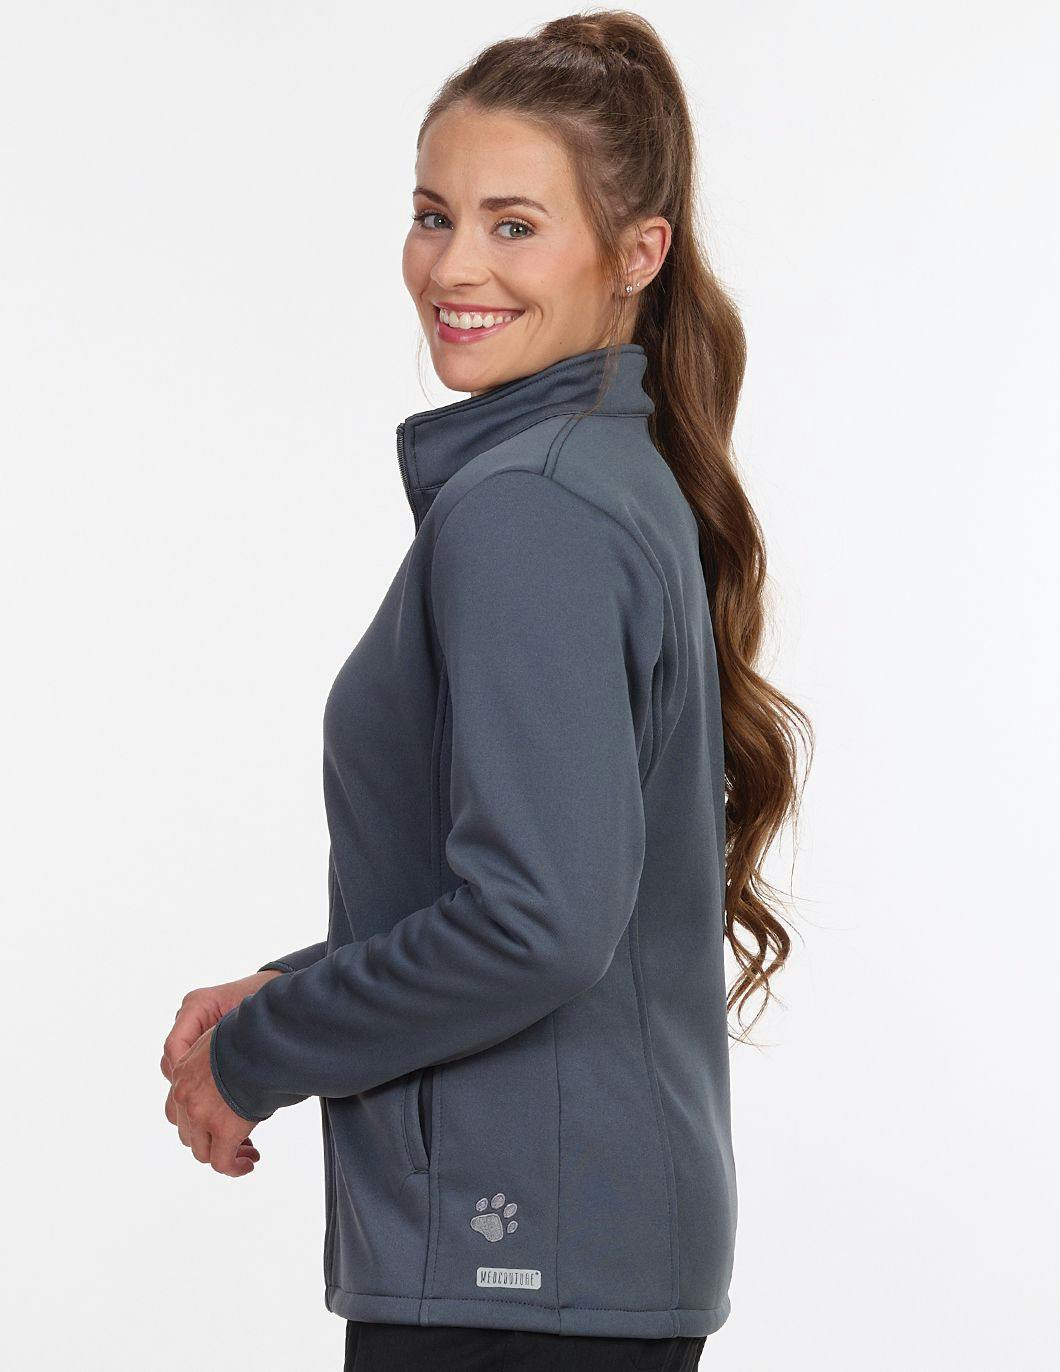 activate-womens-tech-jacket-with-free-zipper-pull-and-paw-alt2